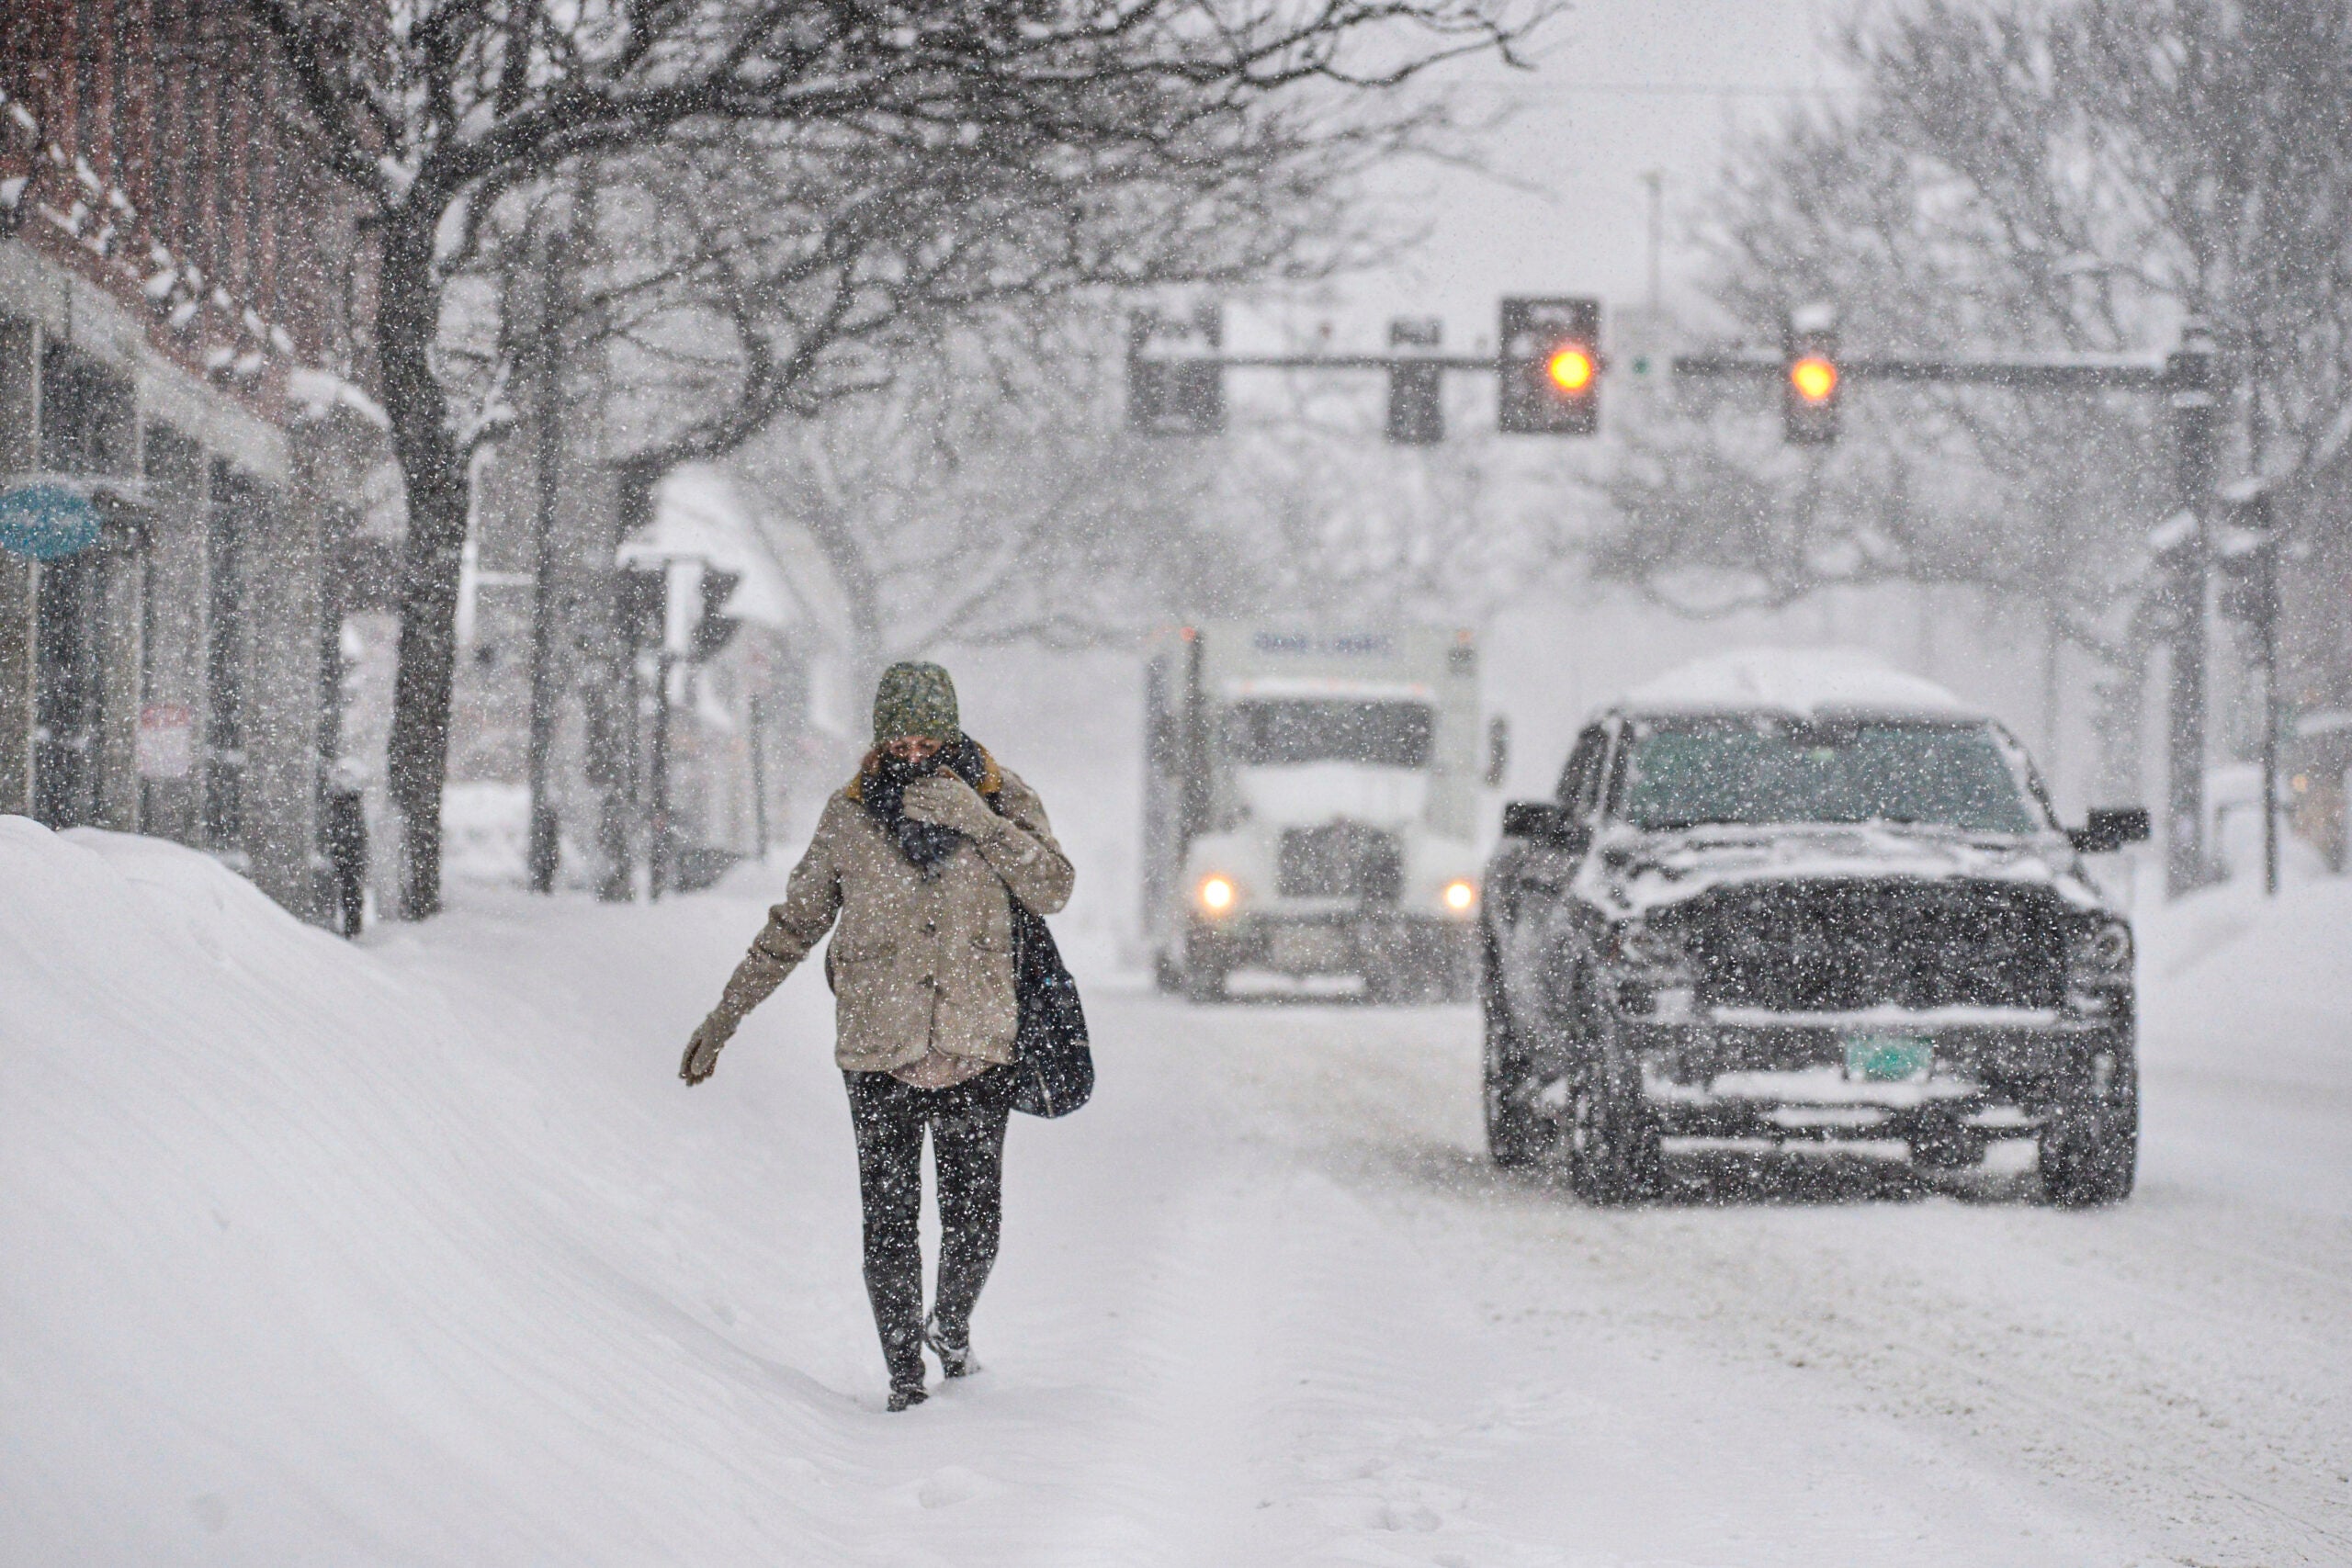 The nor’easter dumped tons of snow in New Hampshire, Vermont, and Maine